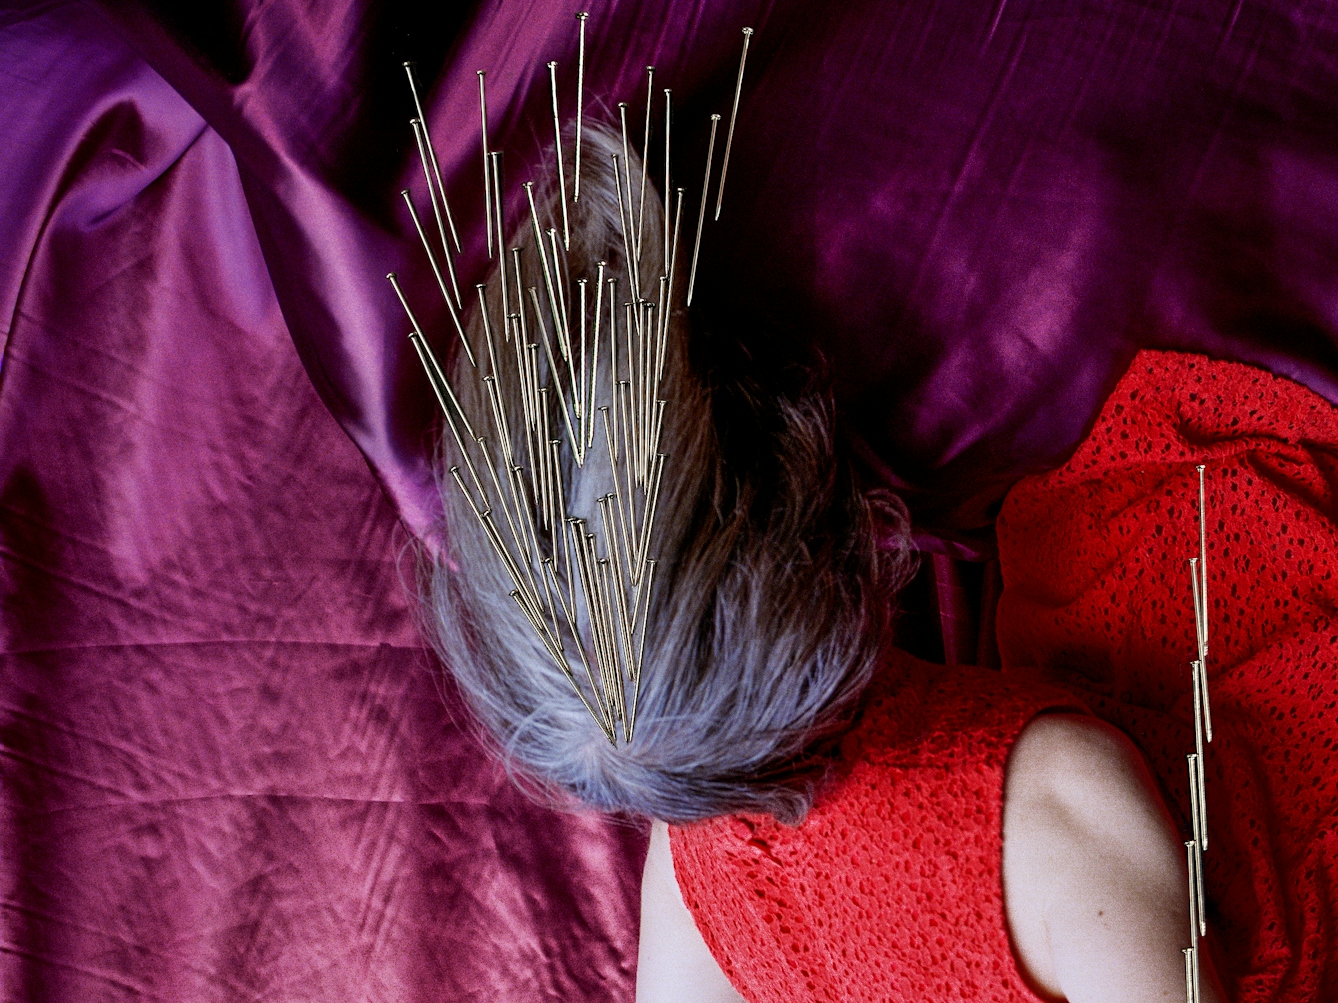 Detail from a larger artwork created with a colour photographic print of a female figure in a bright red dress, set against a purple and blue draped silk background. She is curled up in the frame, caught as if in mid fall, hair blown upwards. Her face is obscured by her hair. Her body is targeted by groups of dress pins, laid on top of the photographic print. The pins are arranged as if they are a flight of arrows directed at her body. One group descends from above towards the crown of her head.